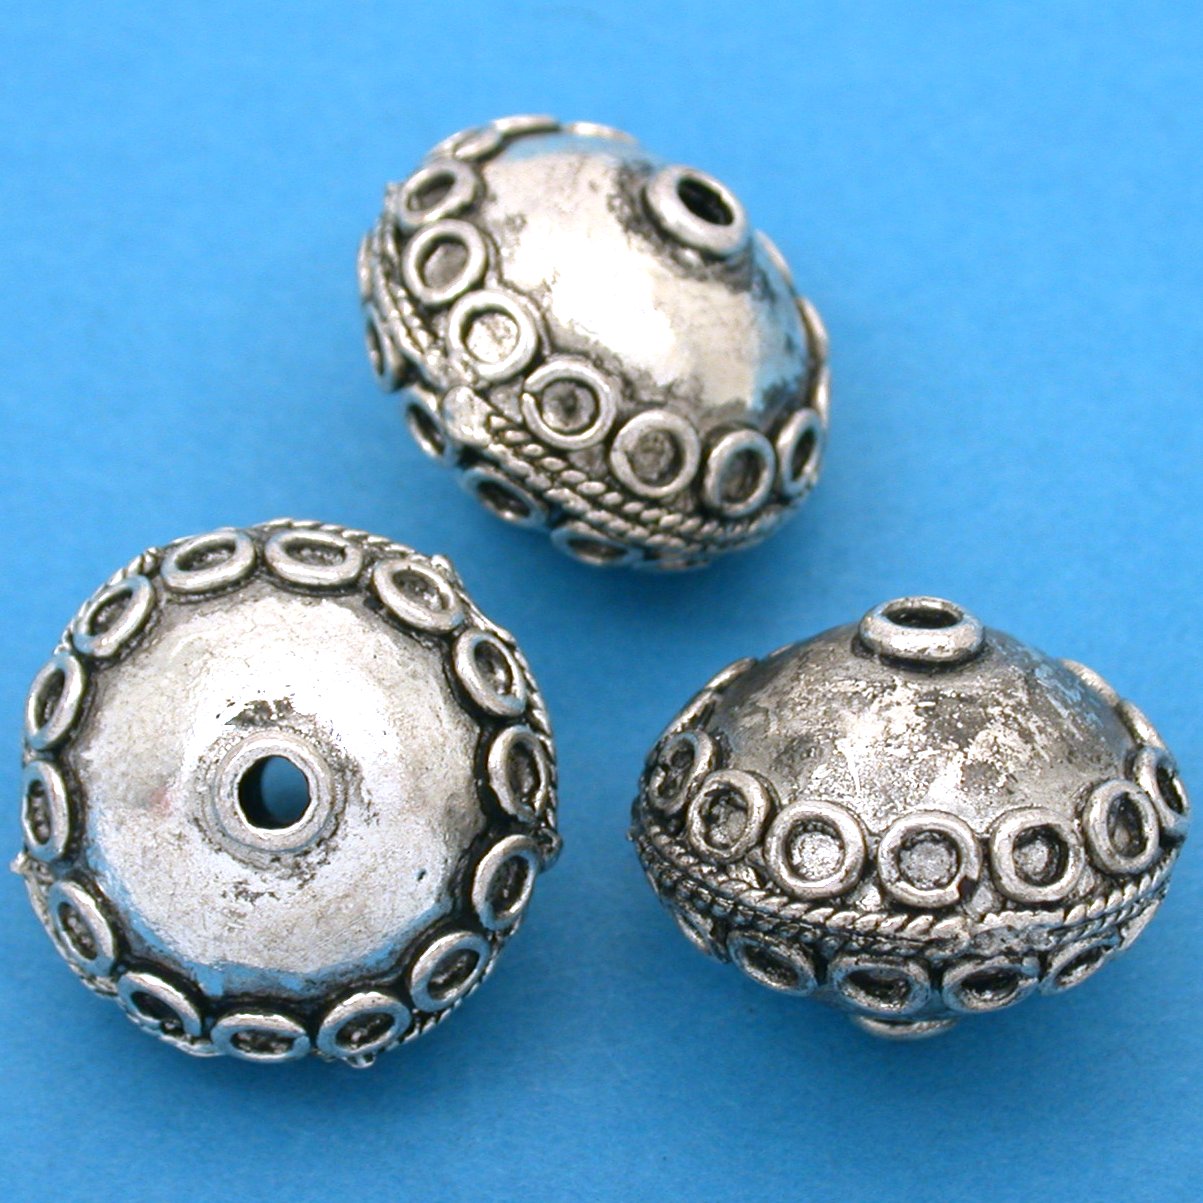 Bali Saucer Antique Silver Plated Beads 17.5mm 2Pcs Approx.